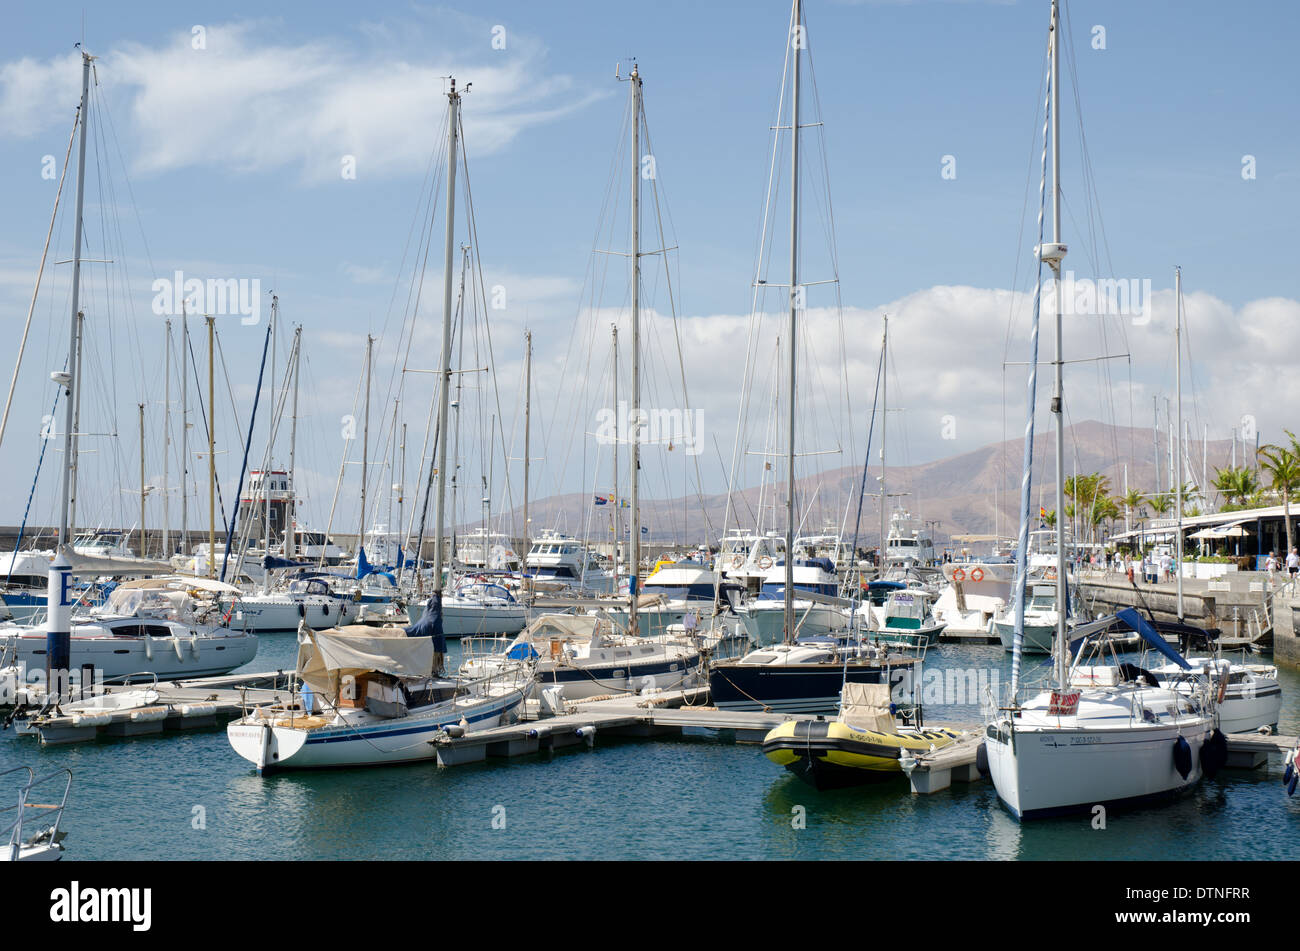 Yachts and boats moored at the marina in Puerto Calero Lanzarote Canary Islands Stock Photo